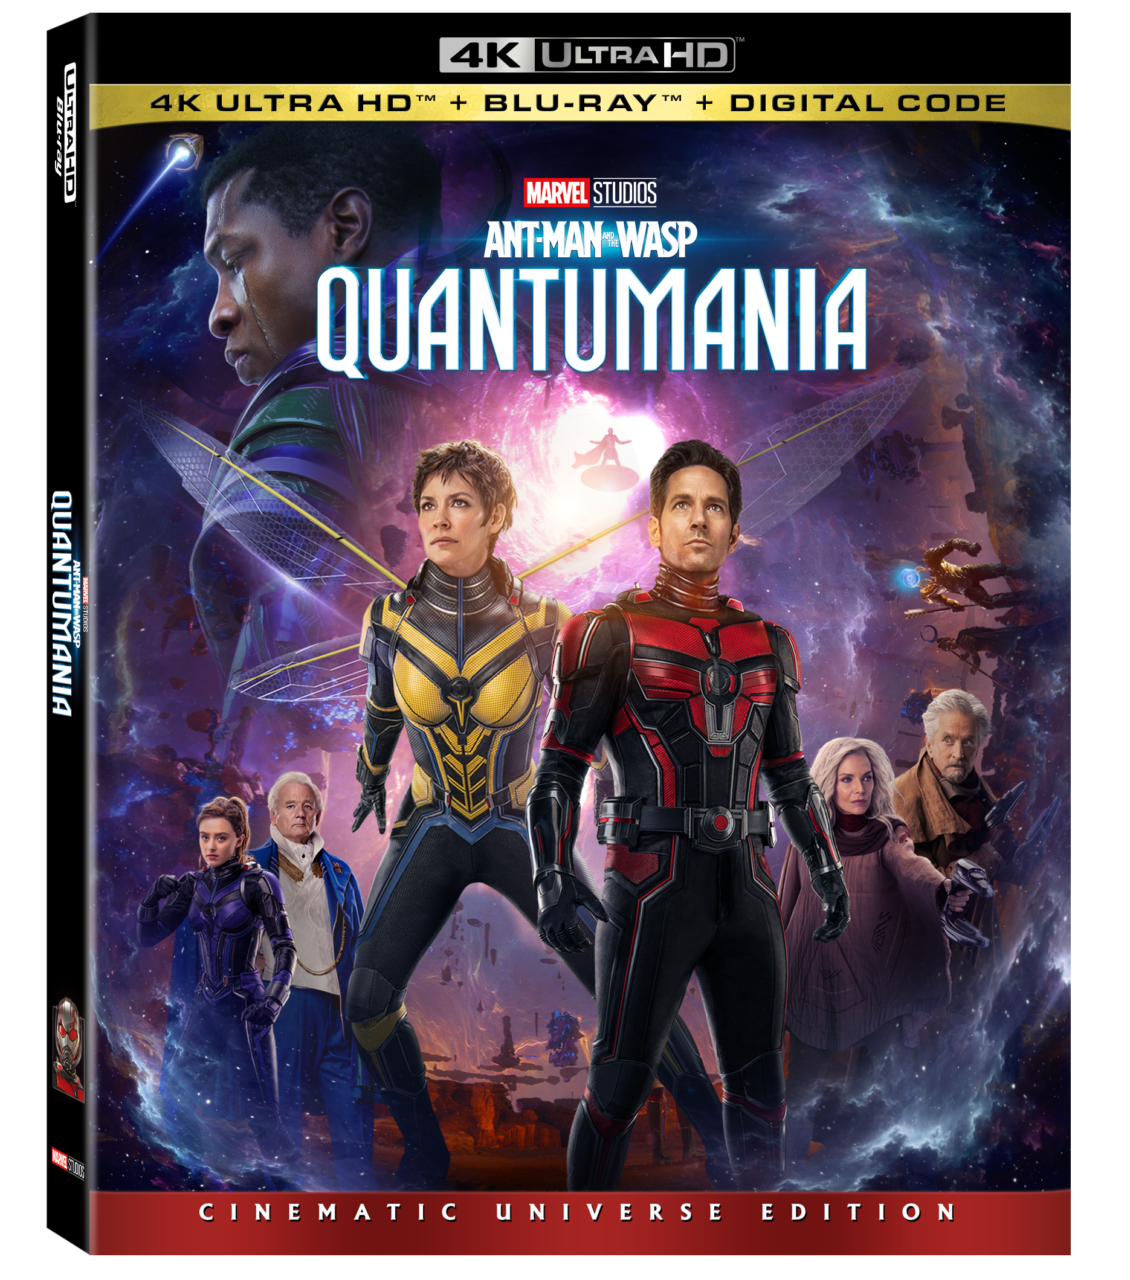 Ant-Man And The Wasp: Quantumania 4K Ultra HD Combo Pack cover (Walt Disney Studios Home Entertainment/Marvel Studios)